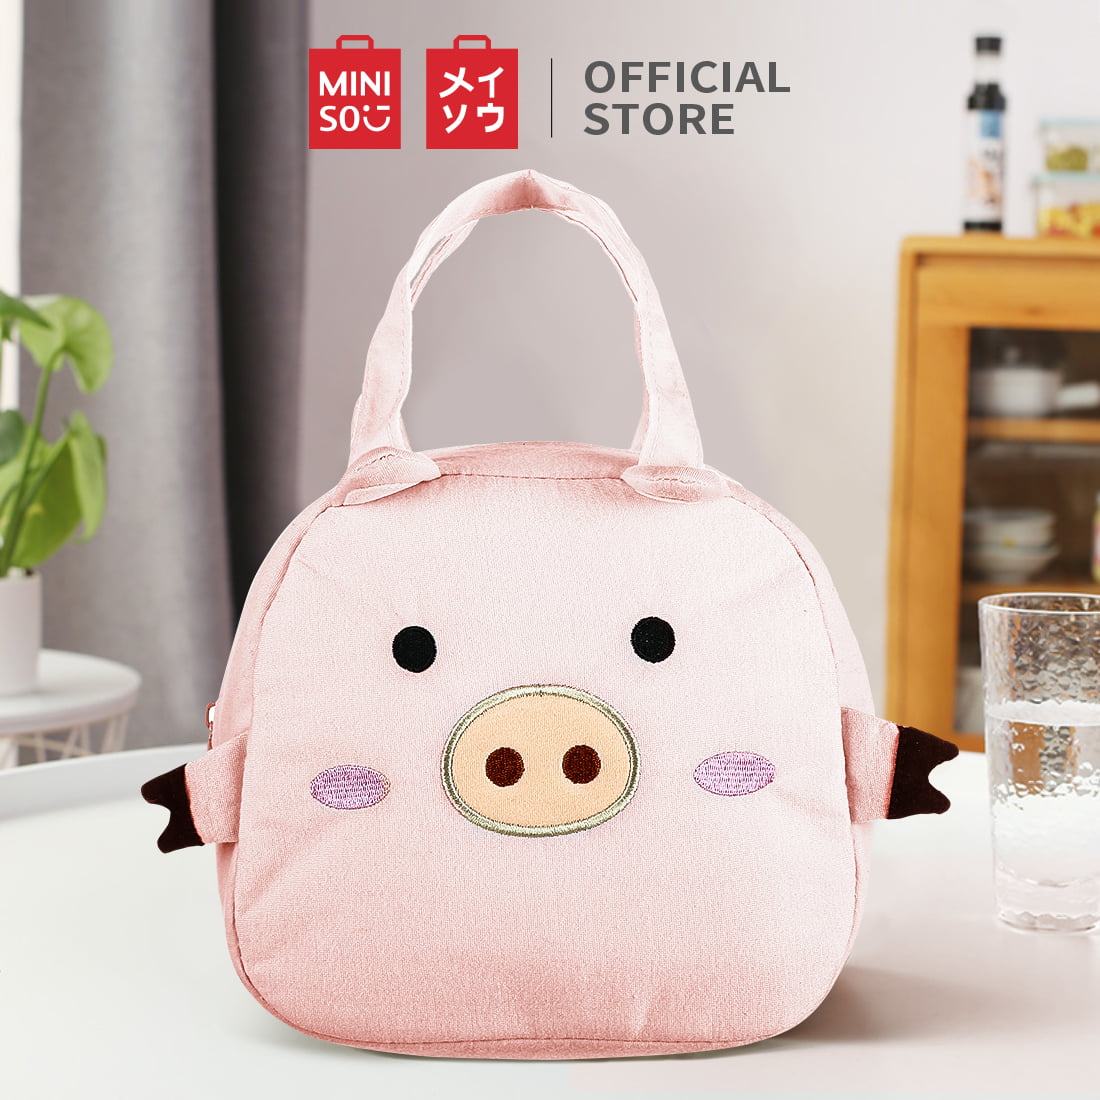 In Stock】 BTS BT21 Insulated Lunch Bag Refrigerated Insulated Lunch Box  Eco-Friendly Bento Picnic Handbag Shoulder Bag